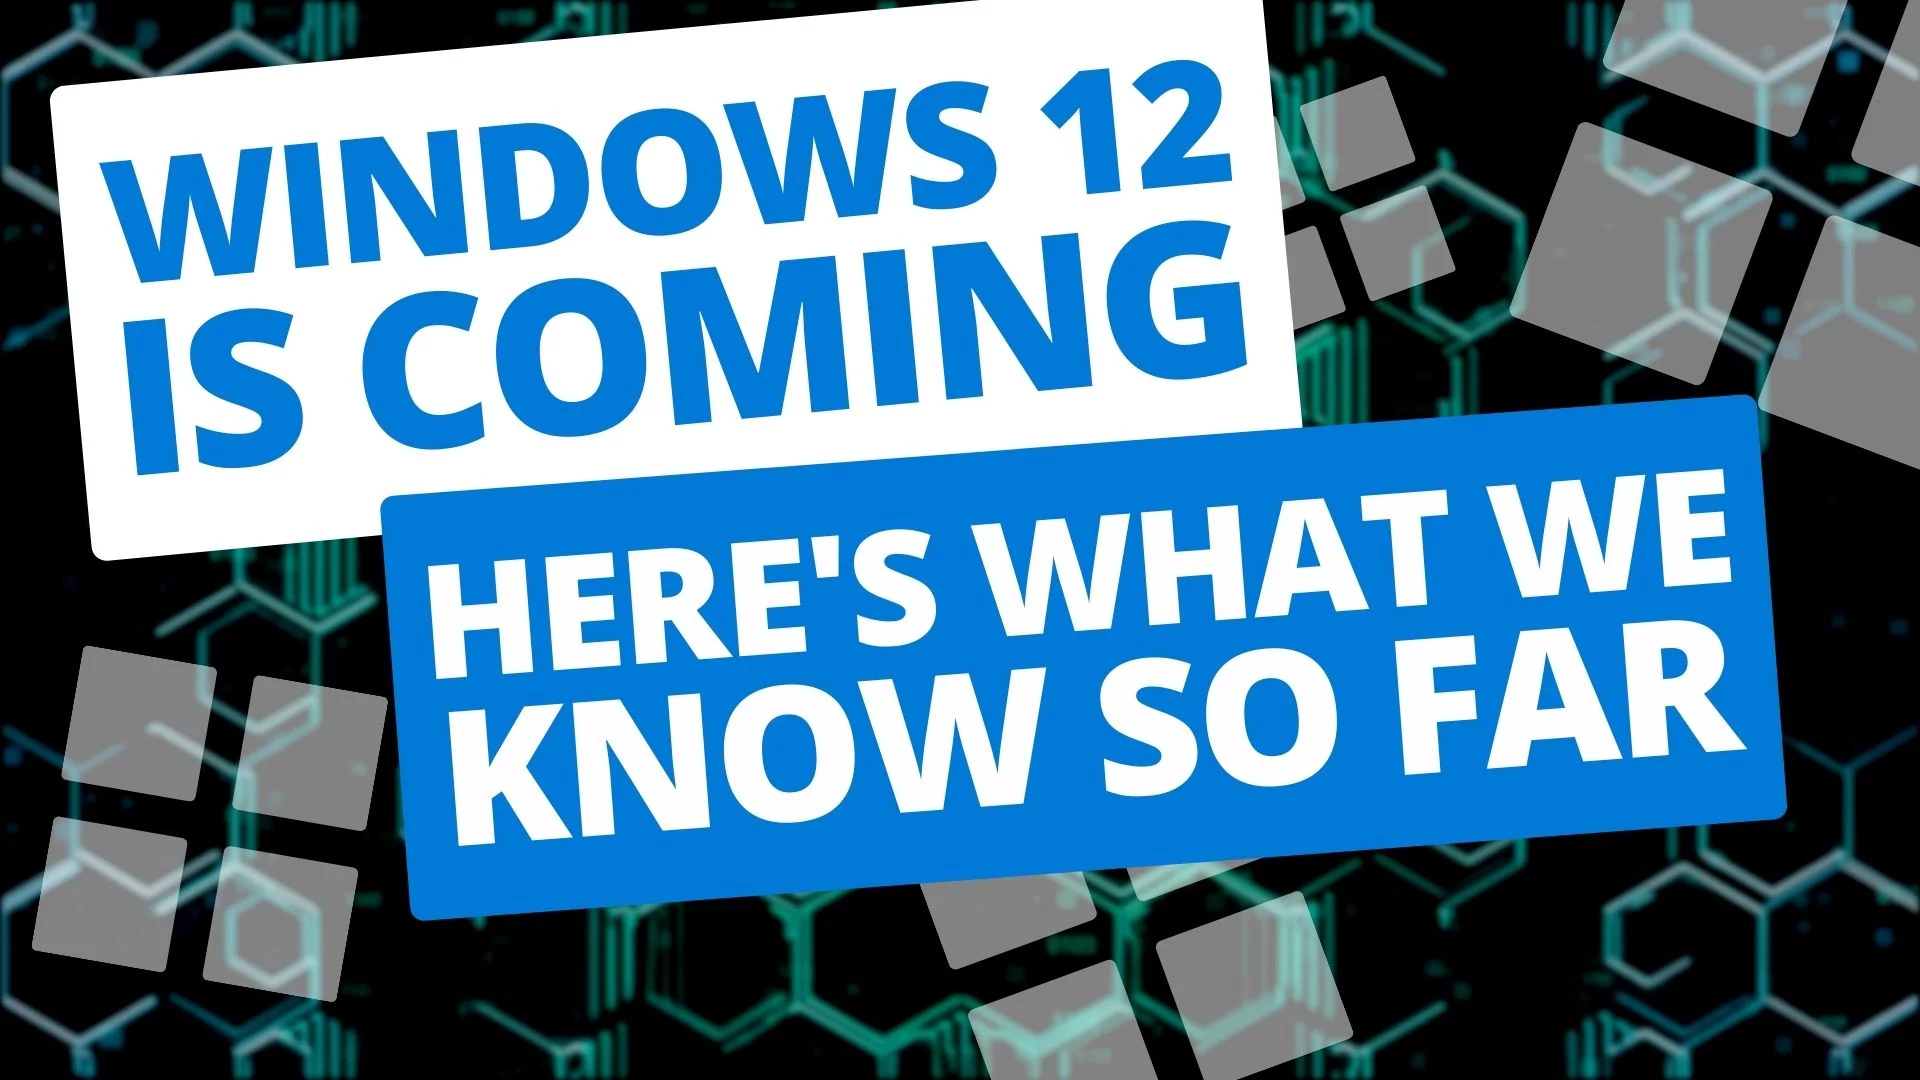 Windows 12 is coming here's what we know so far.